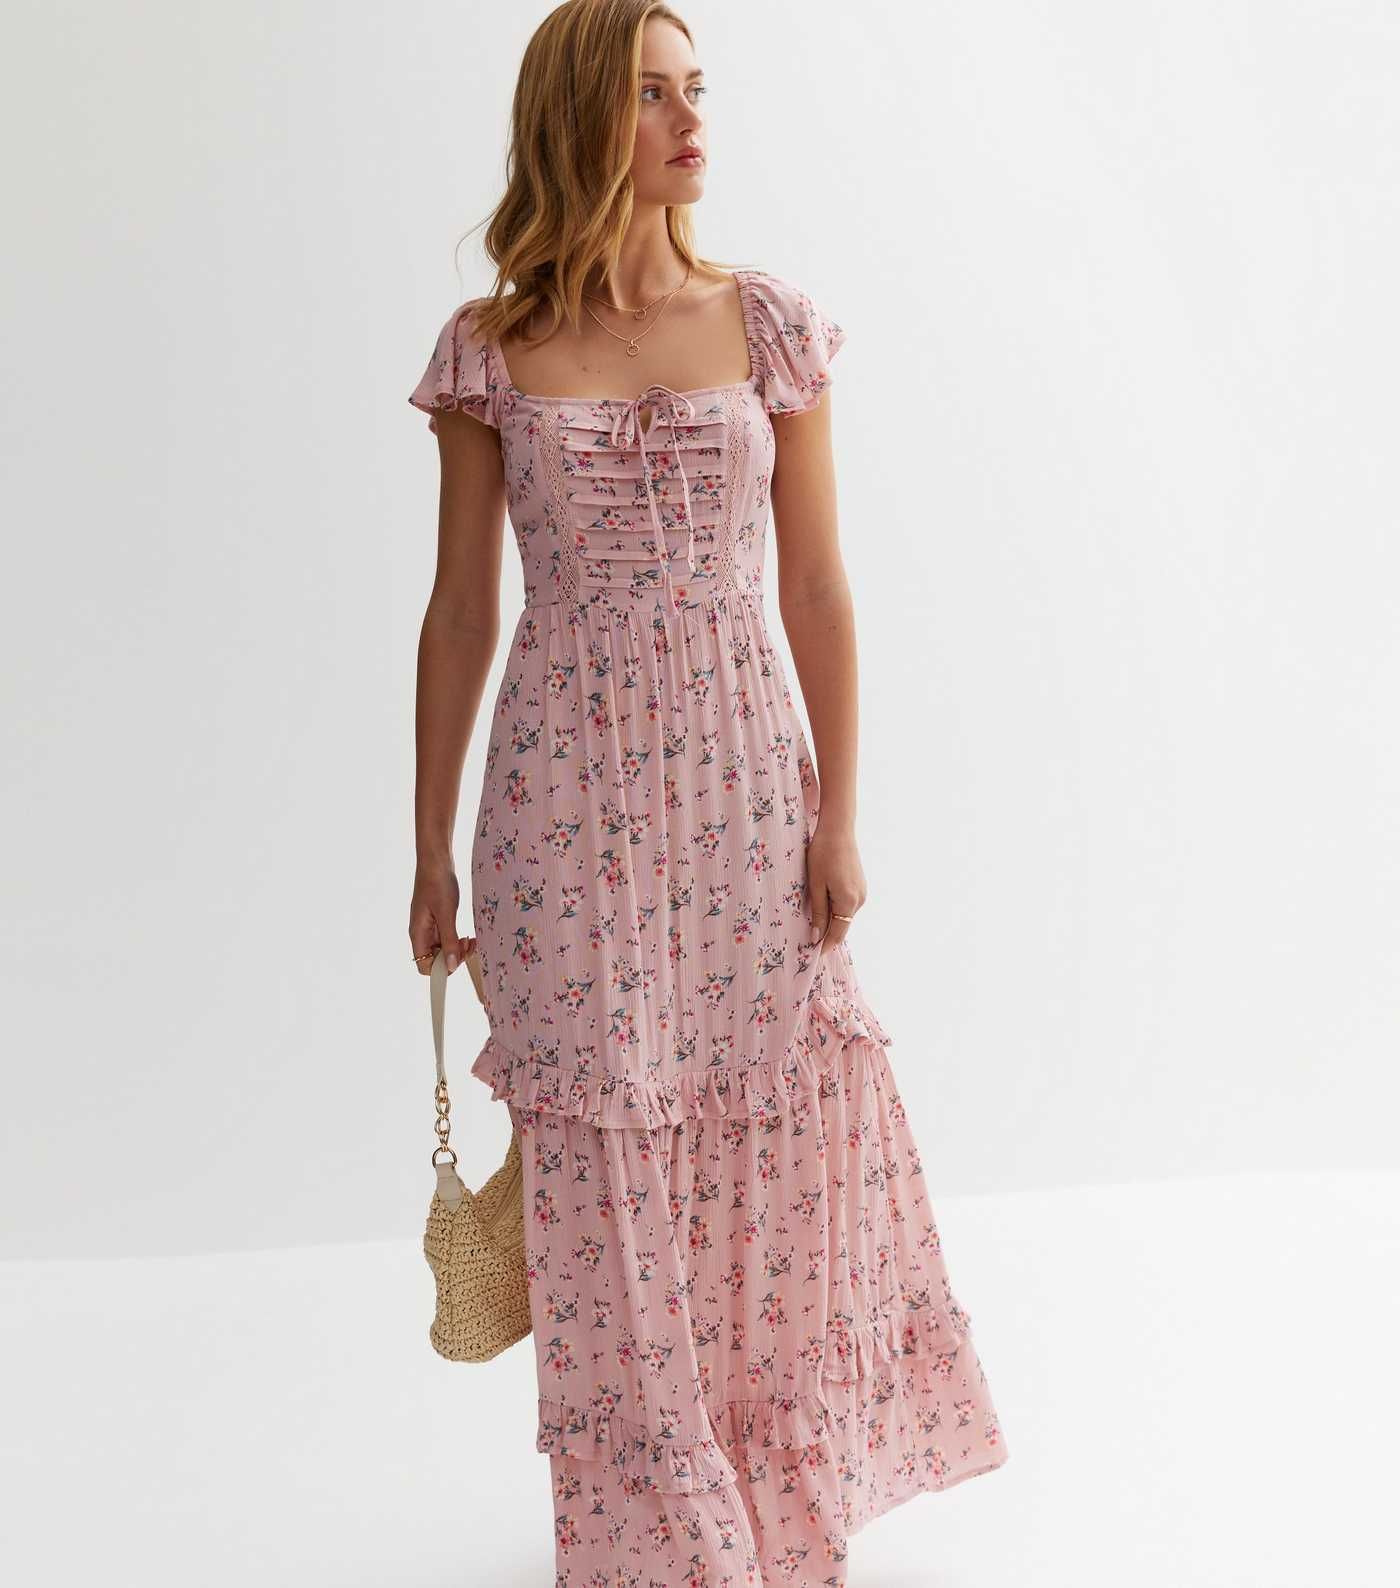 Pink Floral Square Neck Frill Maxi Dress
						
						Add to Saved Items
						Remove from Saved ... | New Look (UK)